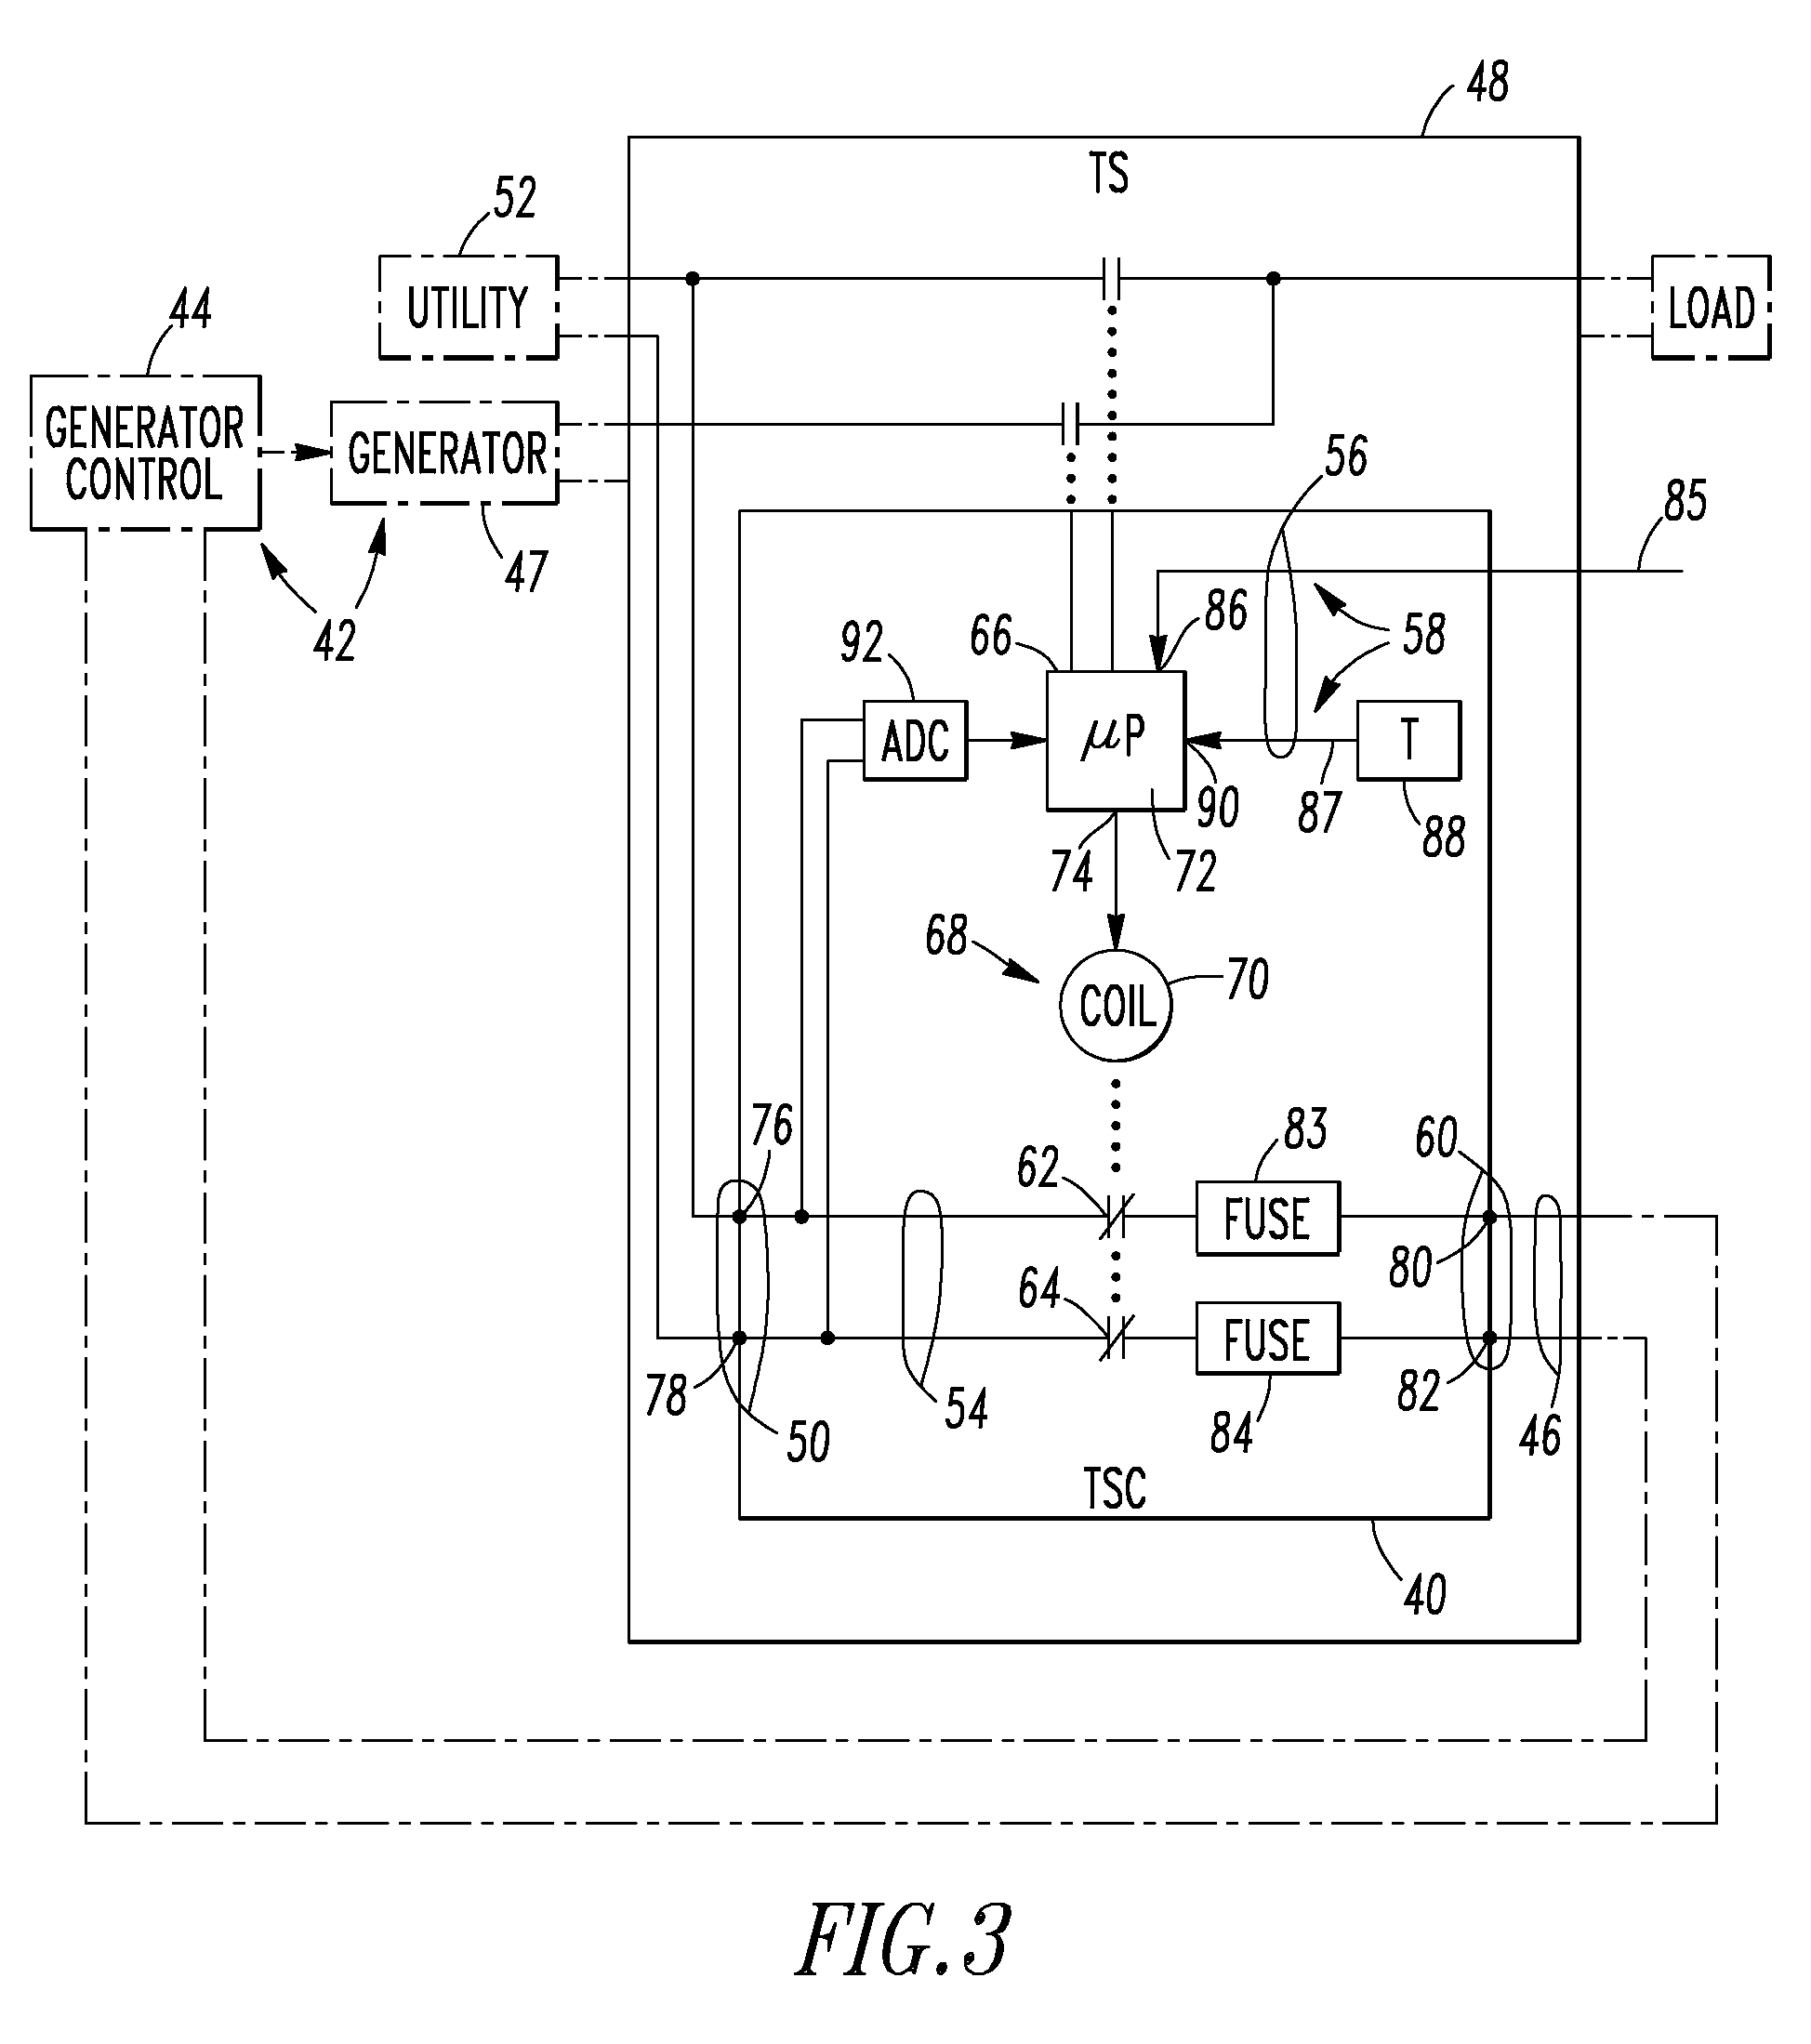 Transfer switch controller providing an alternating current voltage to a generator and transfer switch including the same